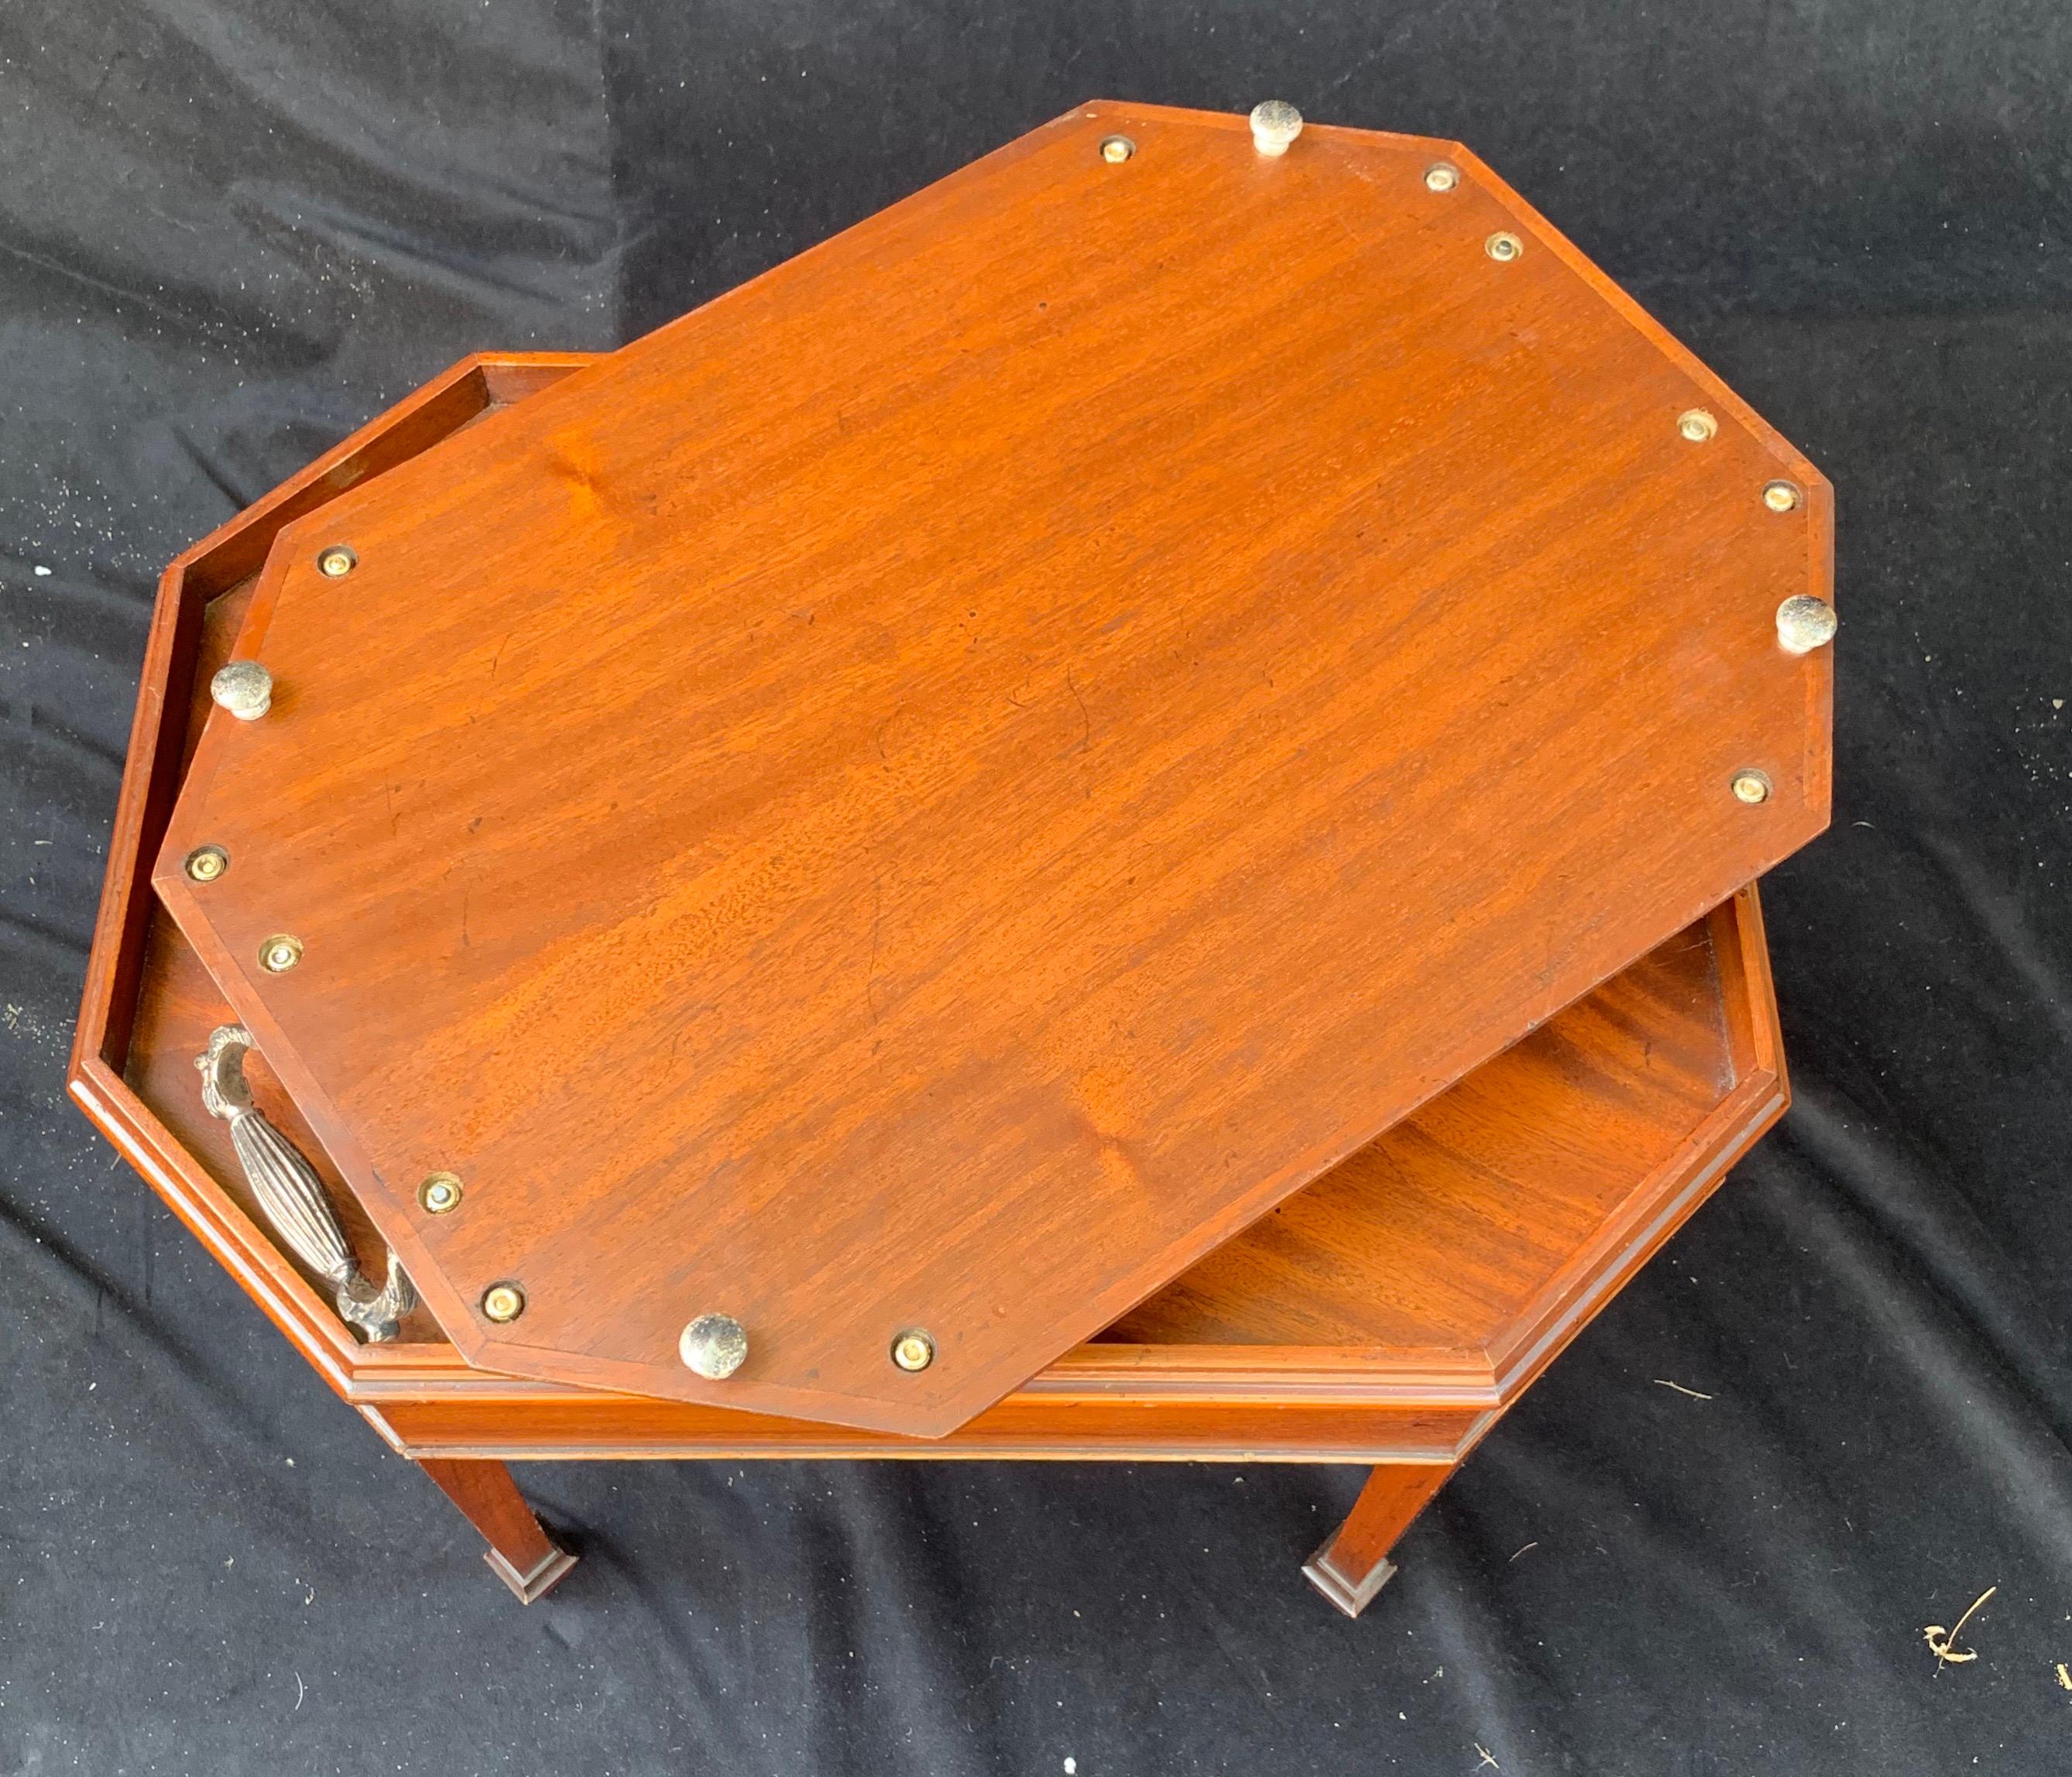 Wonderful Inlaid Musical Marquetry Silver Plated Removable Gallery Tray Table In Good Condition For Sale In Roslyn, NY